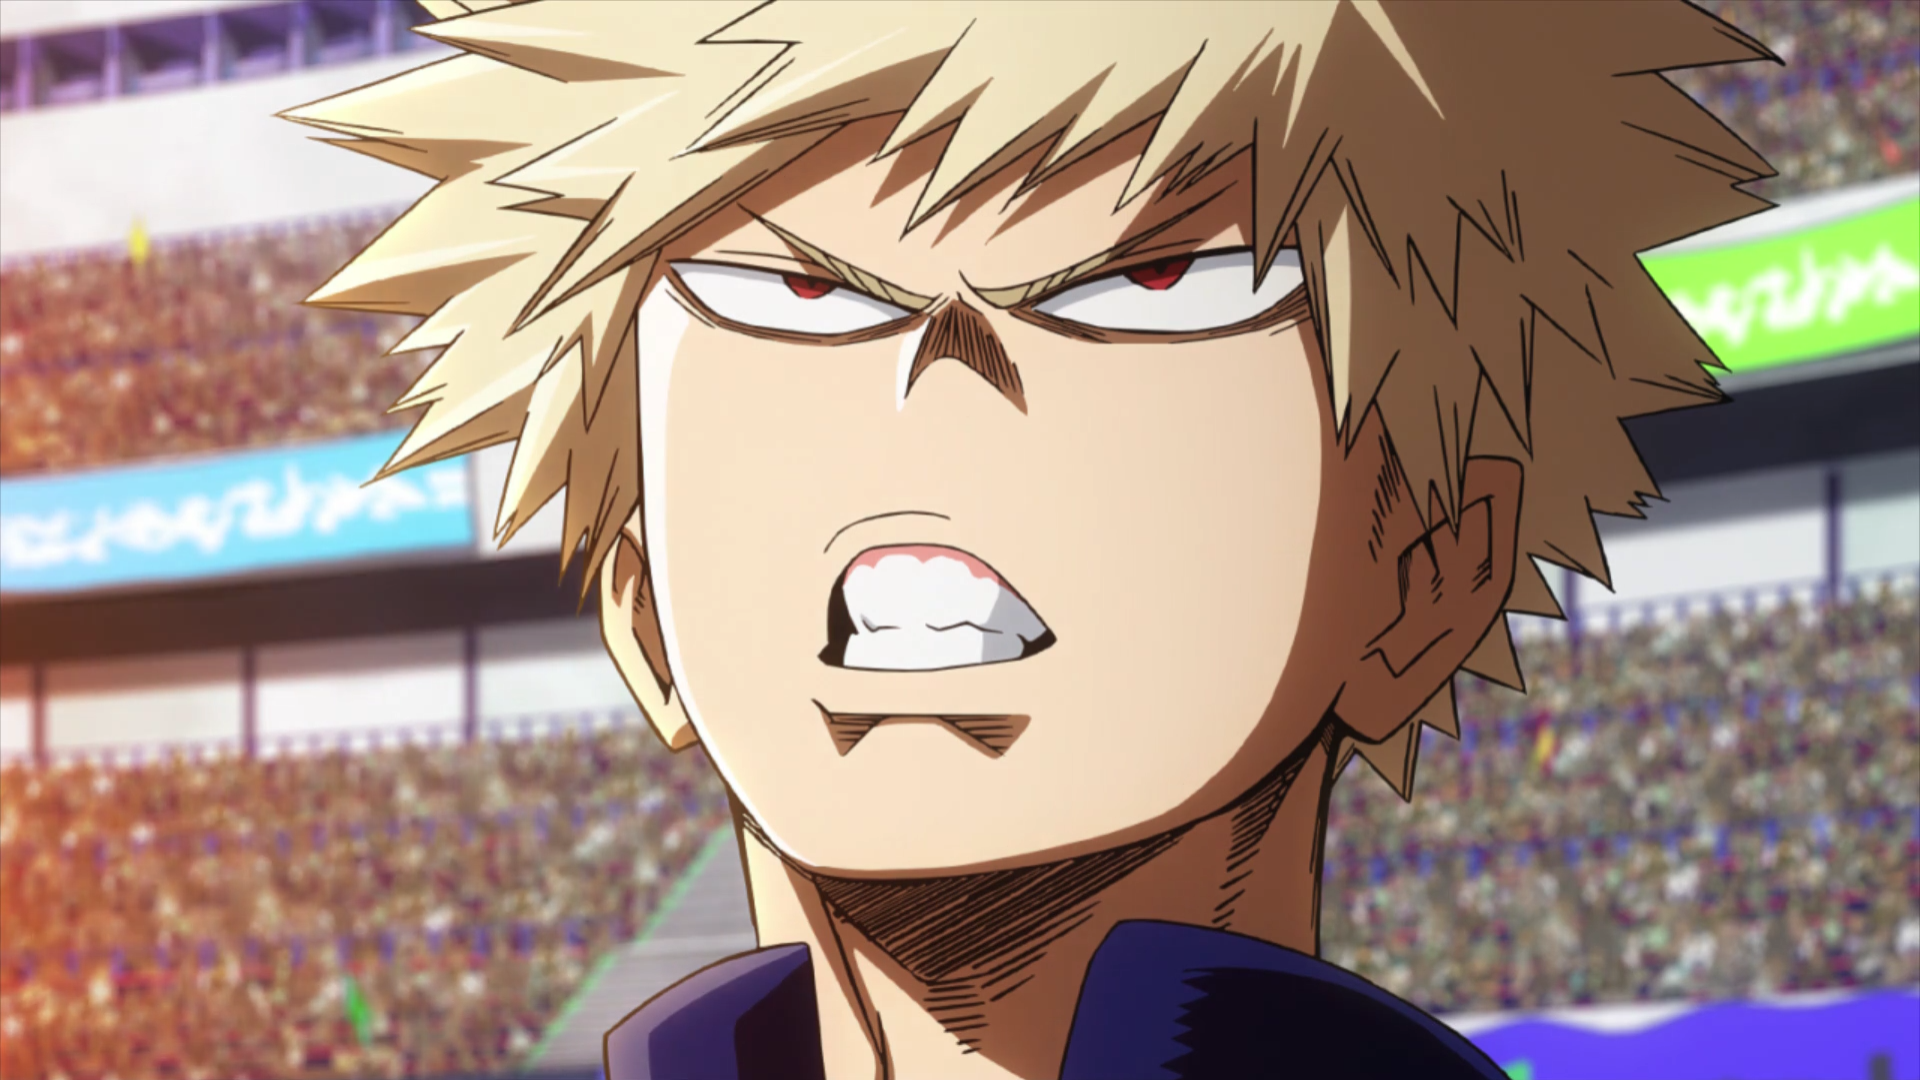 See? 38+ Facts On Bakugou Angry Face Png They Forgot to Share You